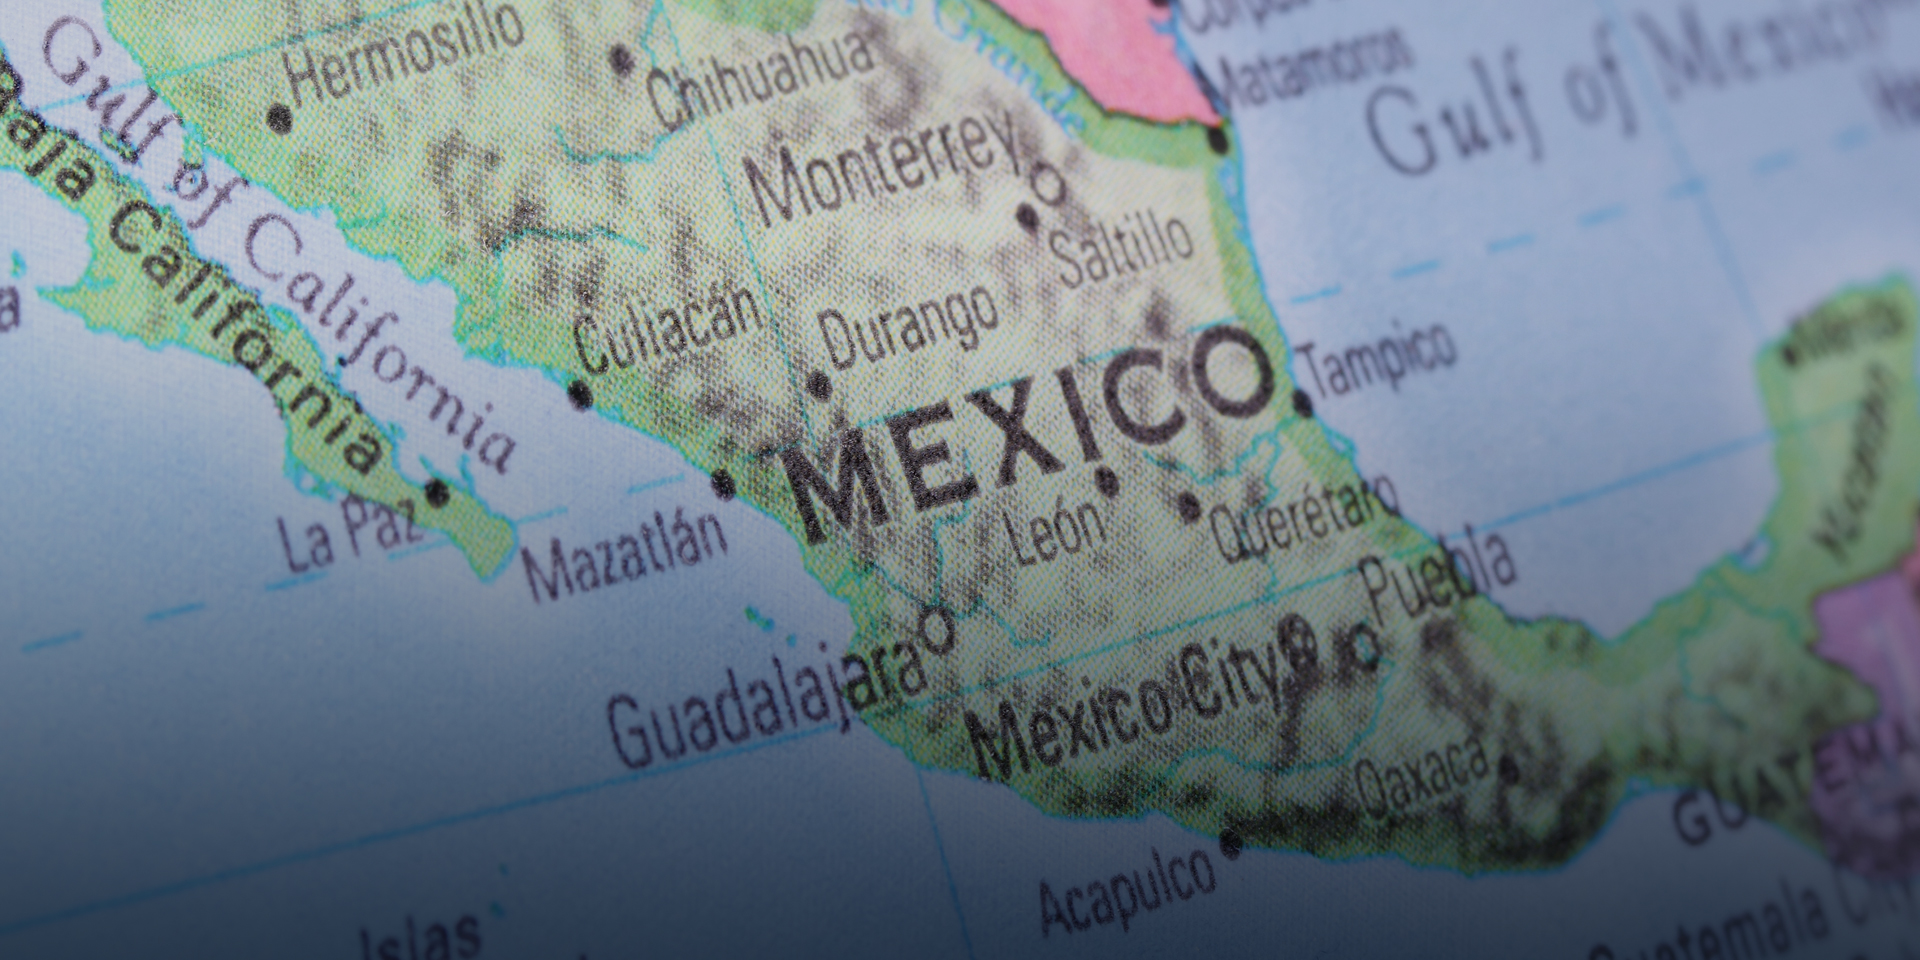 A close-up image of Mexico on a map.